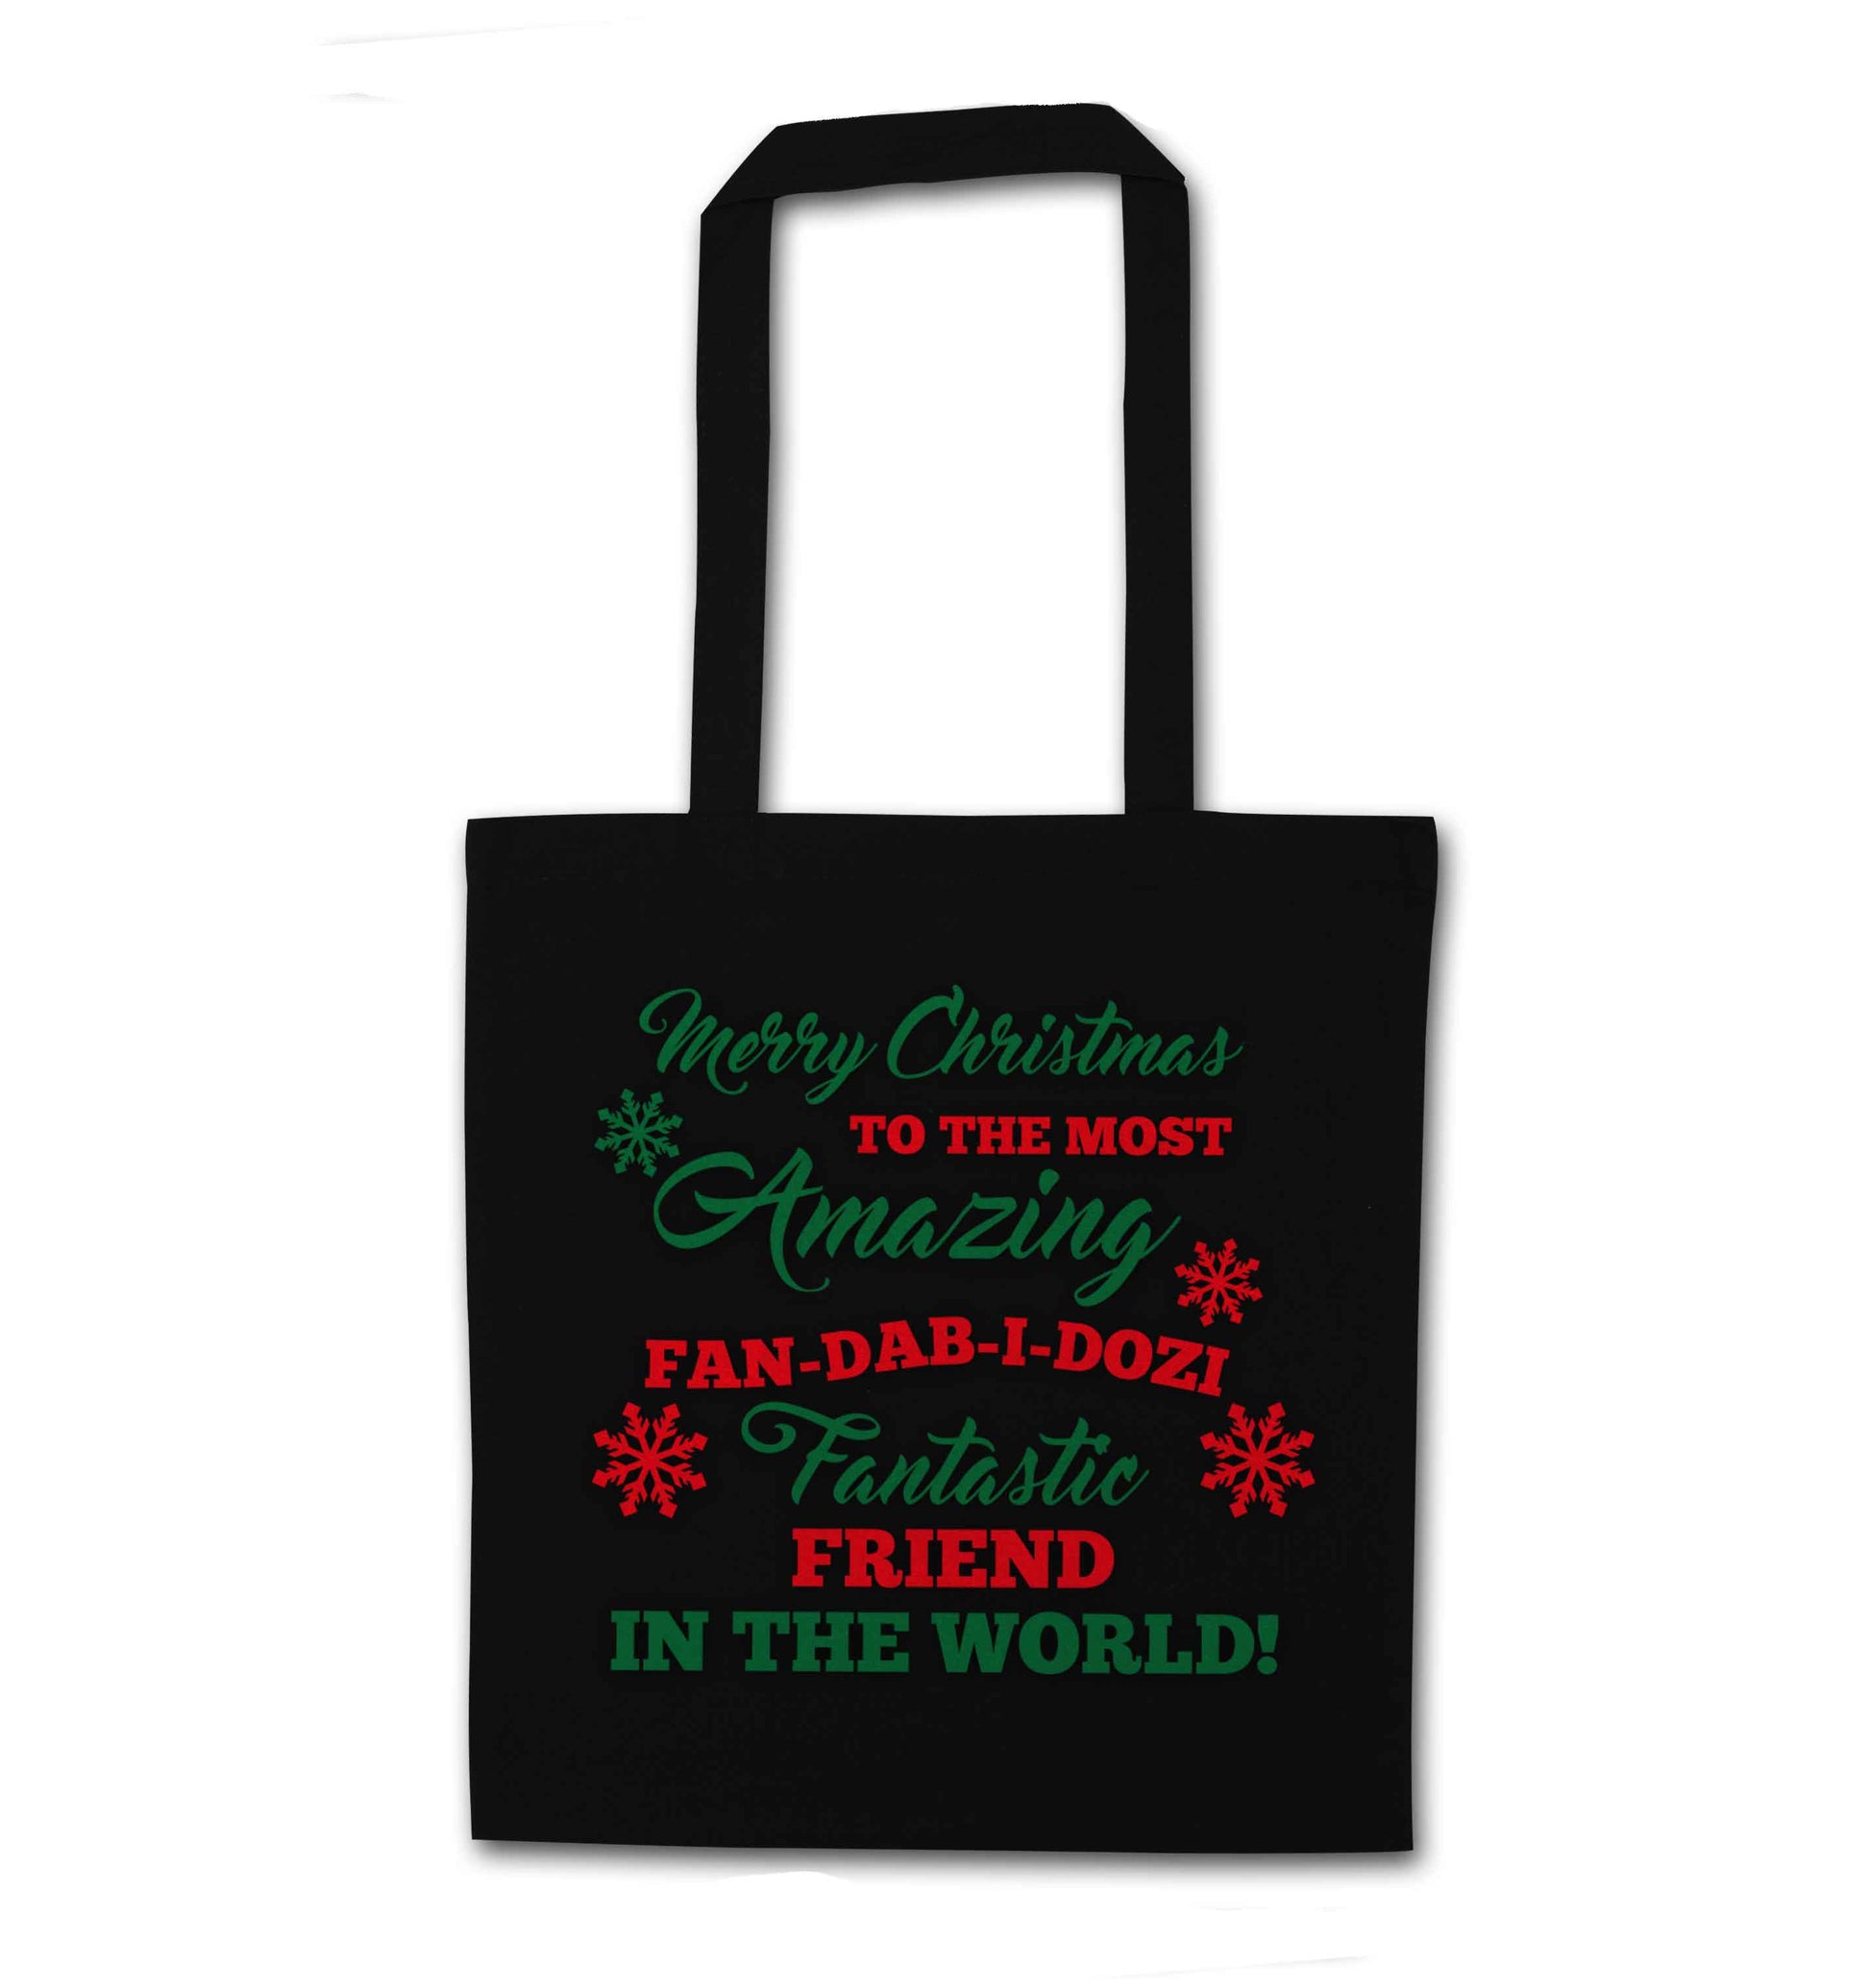 Merry Christmas to the most amazing fan-dab-i-dozi fantasic friend in the world black tote bag